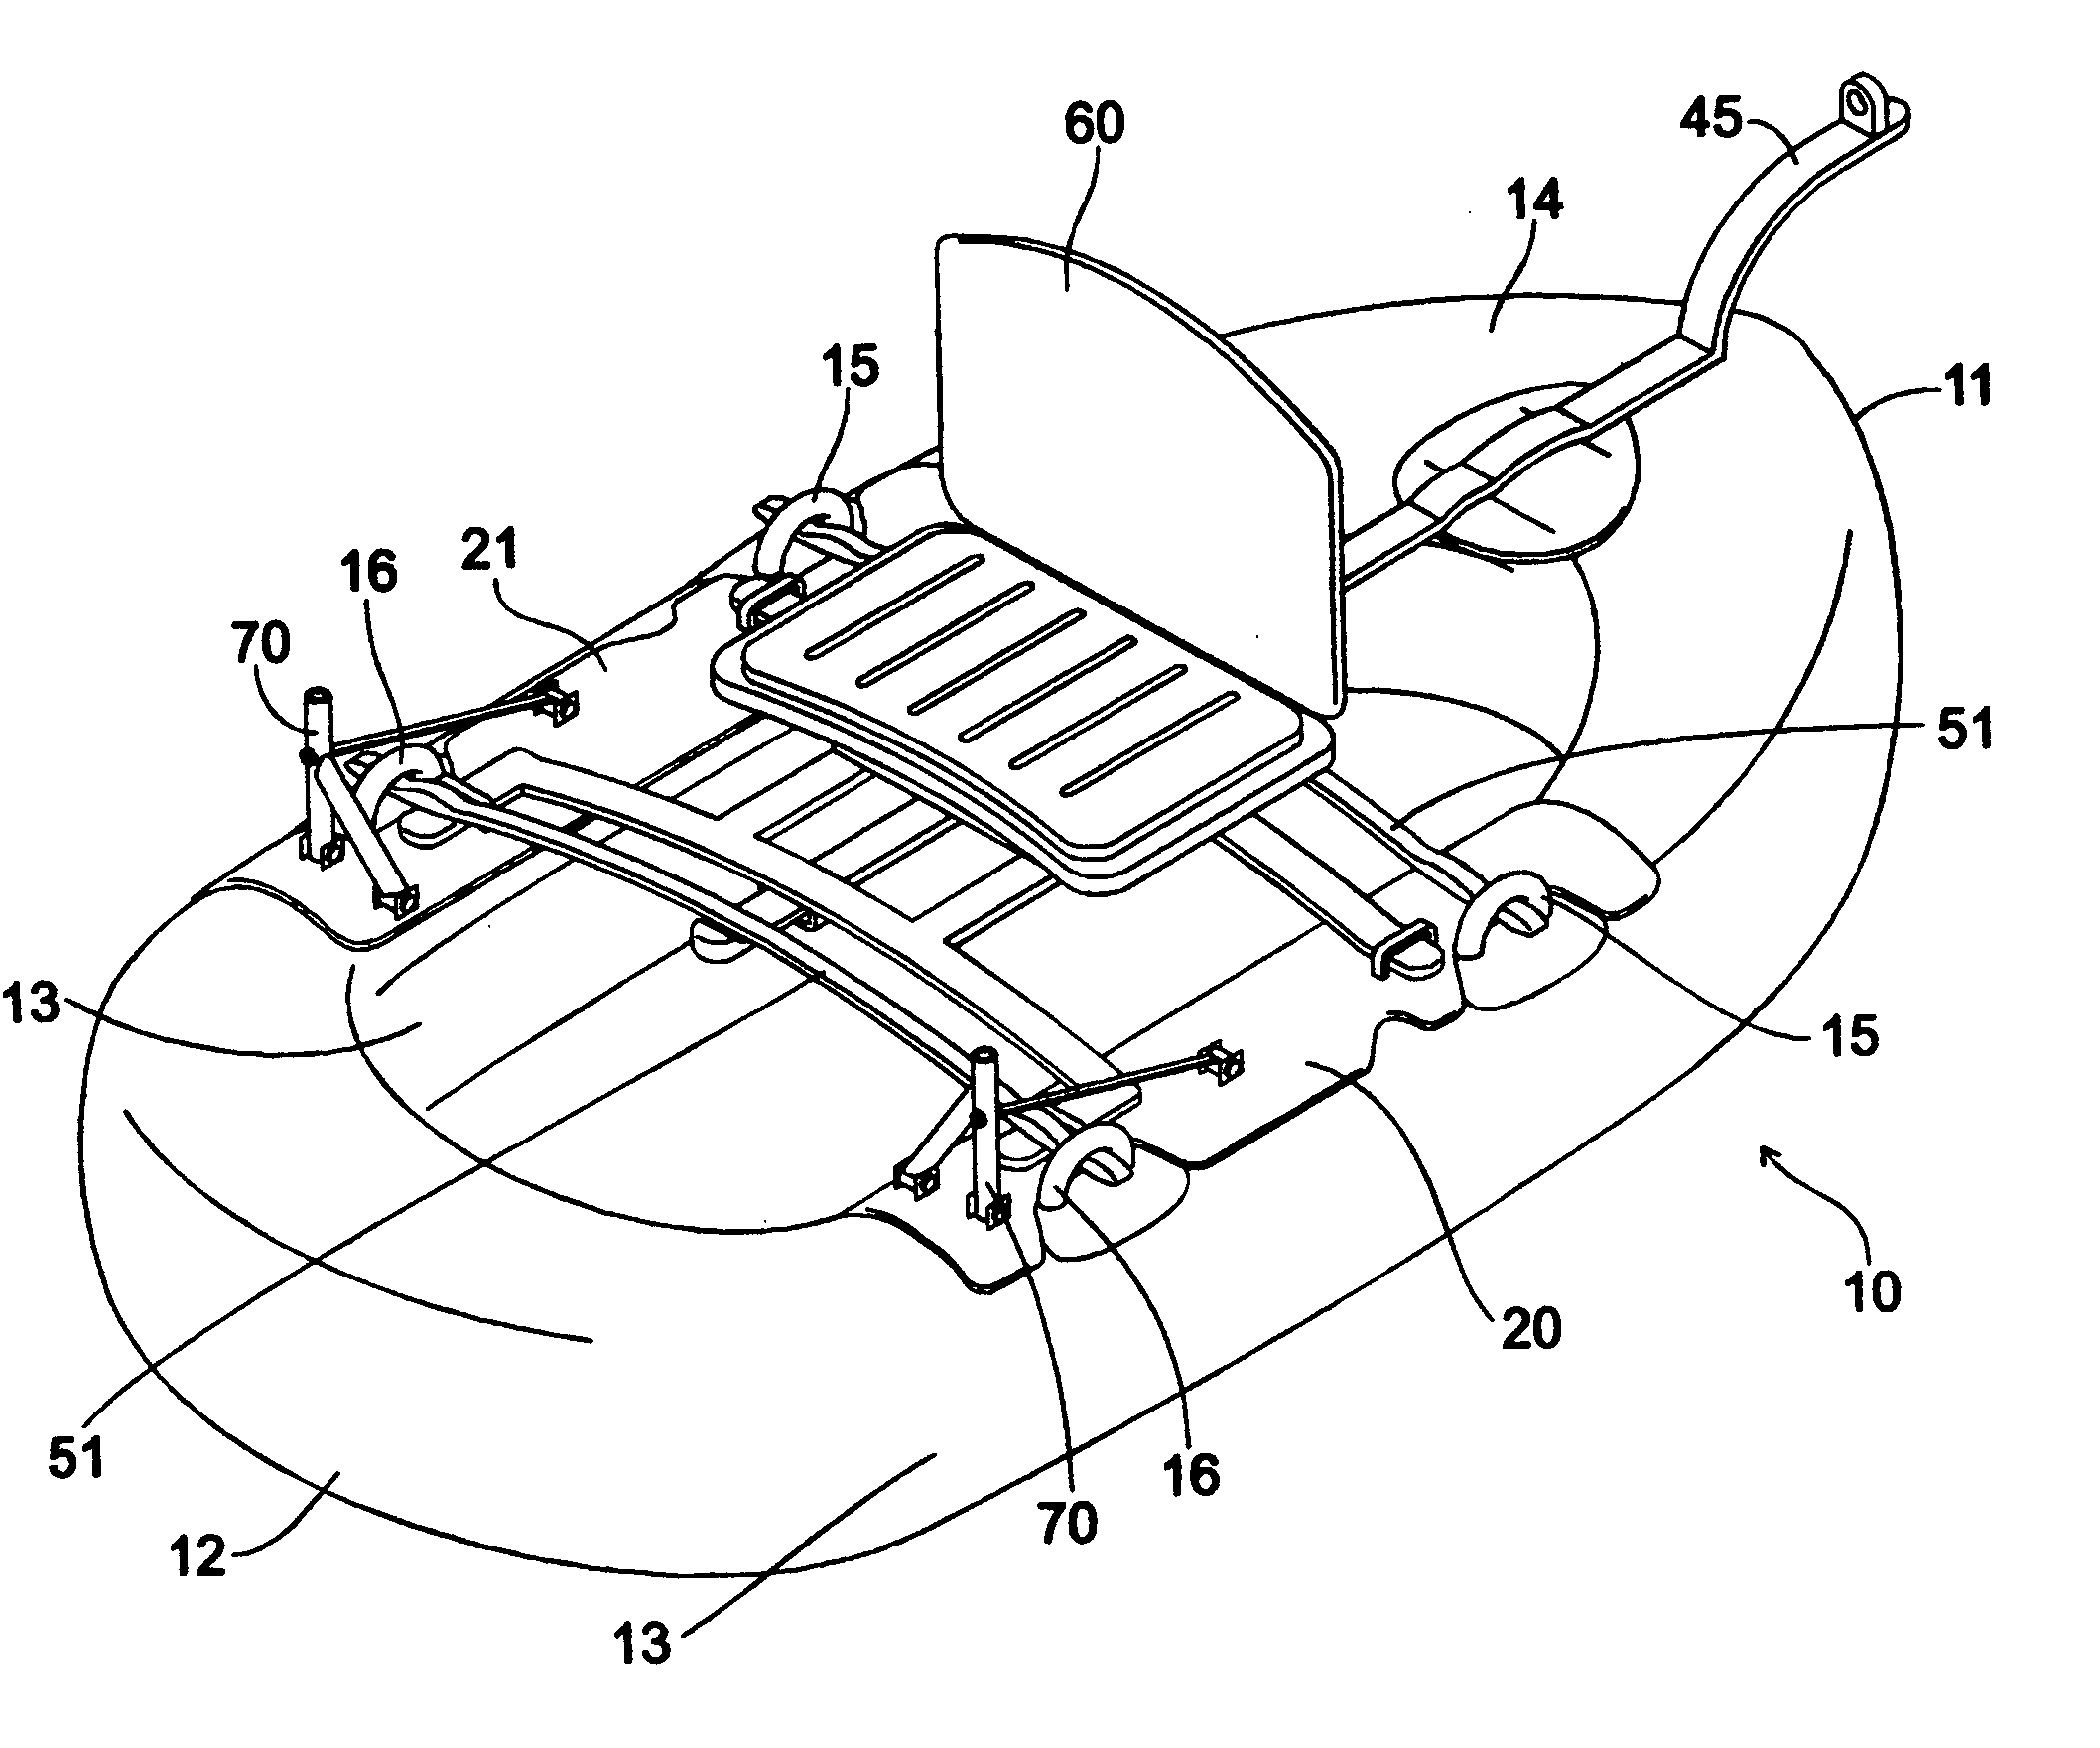 Seating and rowing attachment for inflatable raft